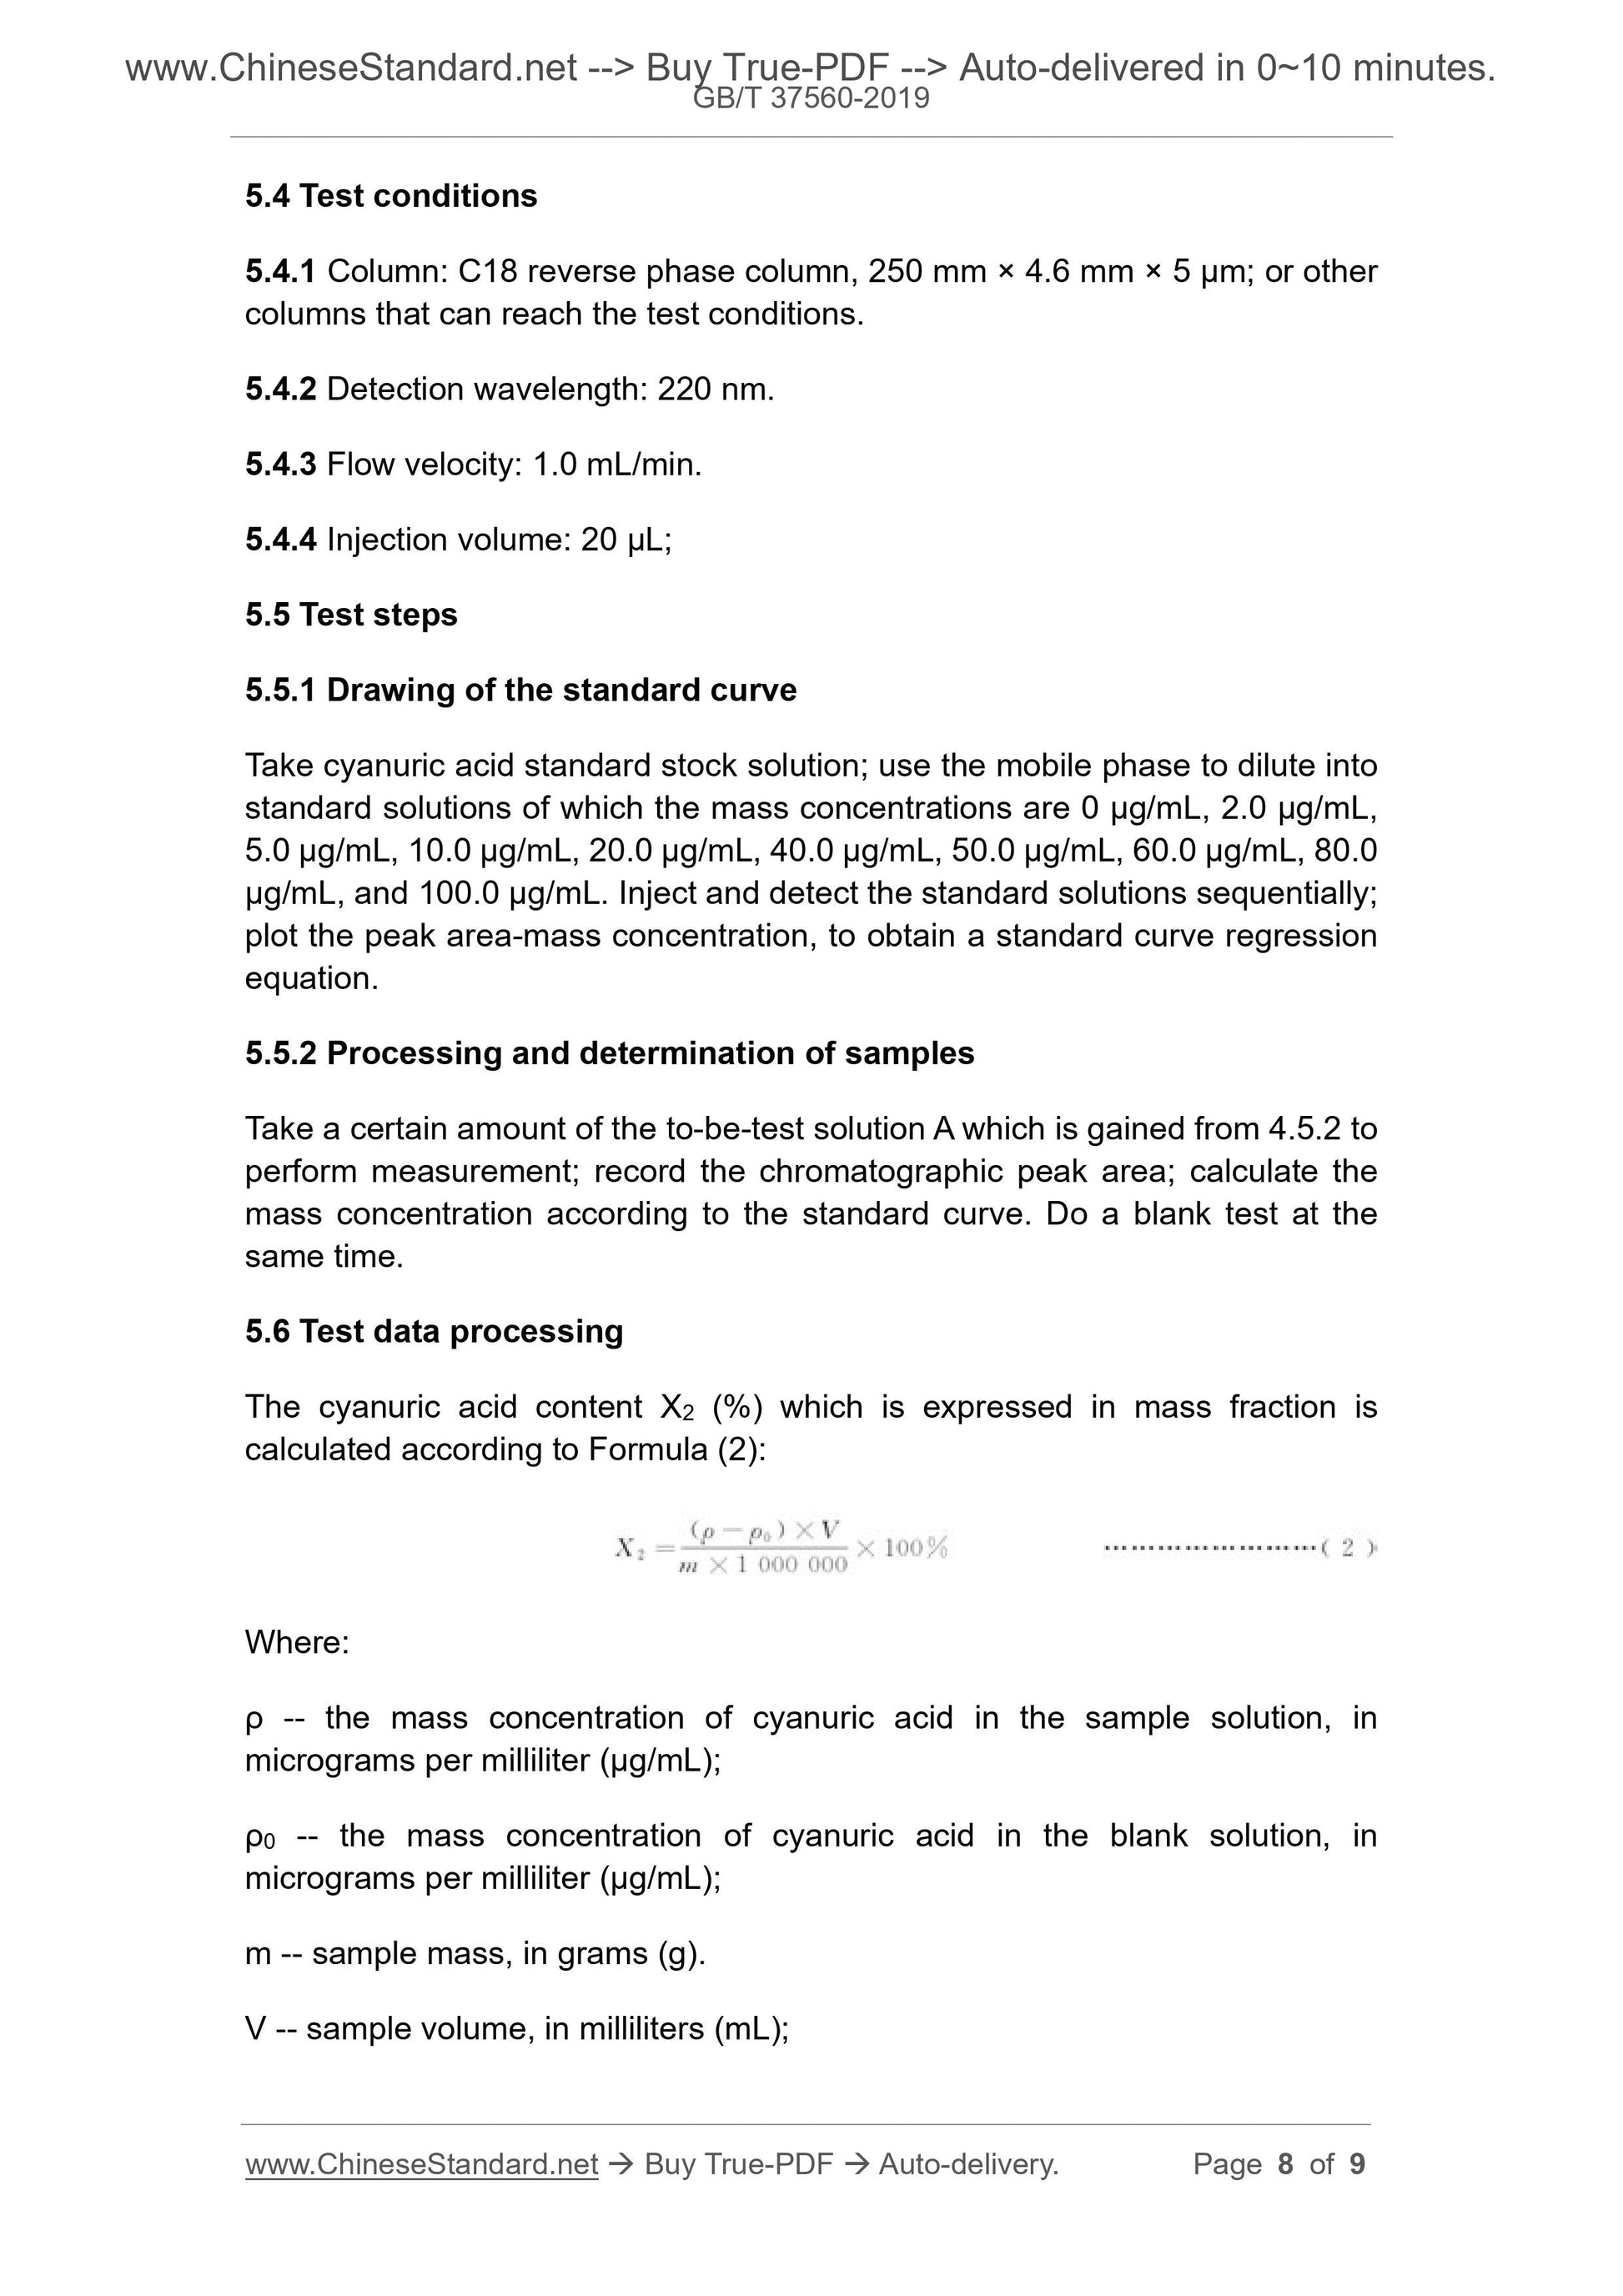 GB/T 37560-2019 Page 5